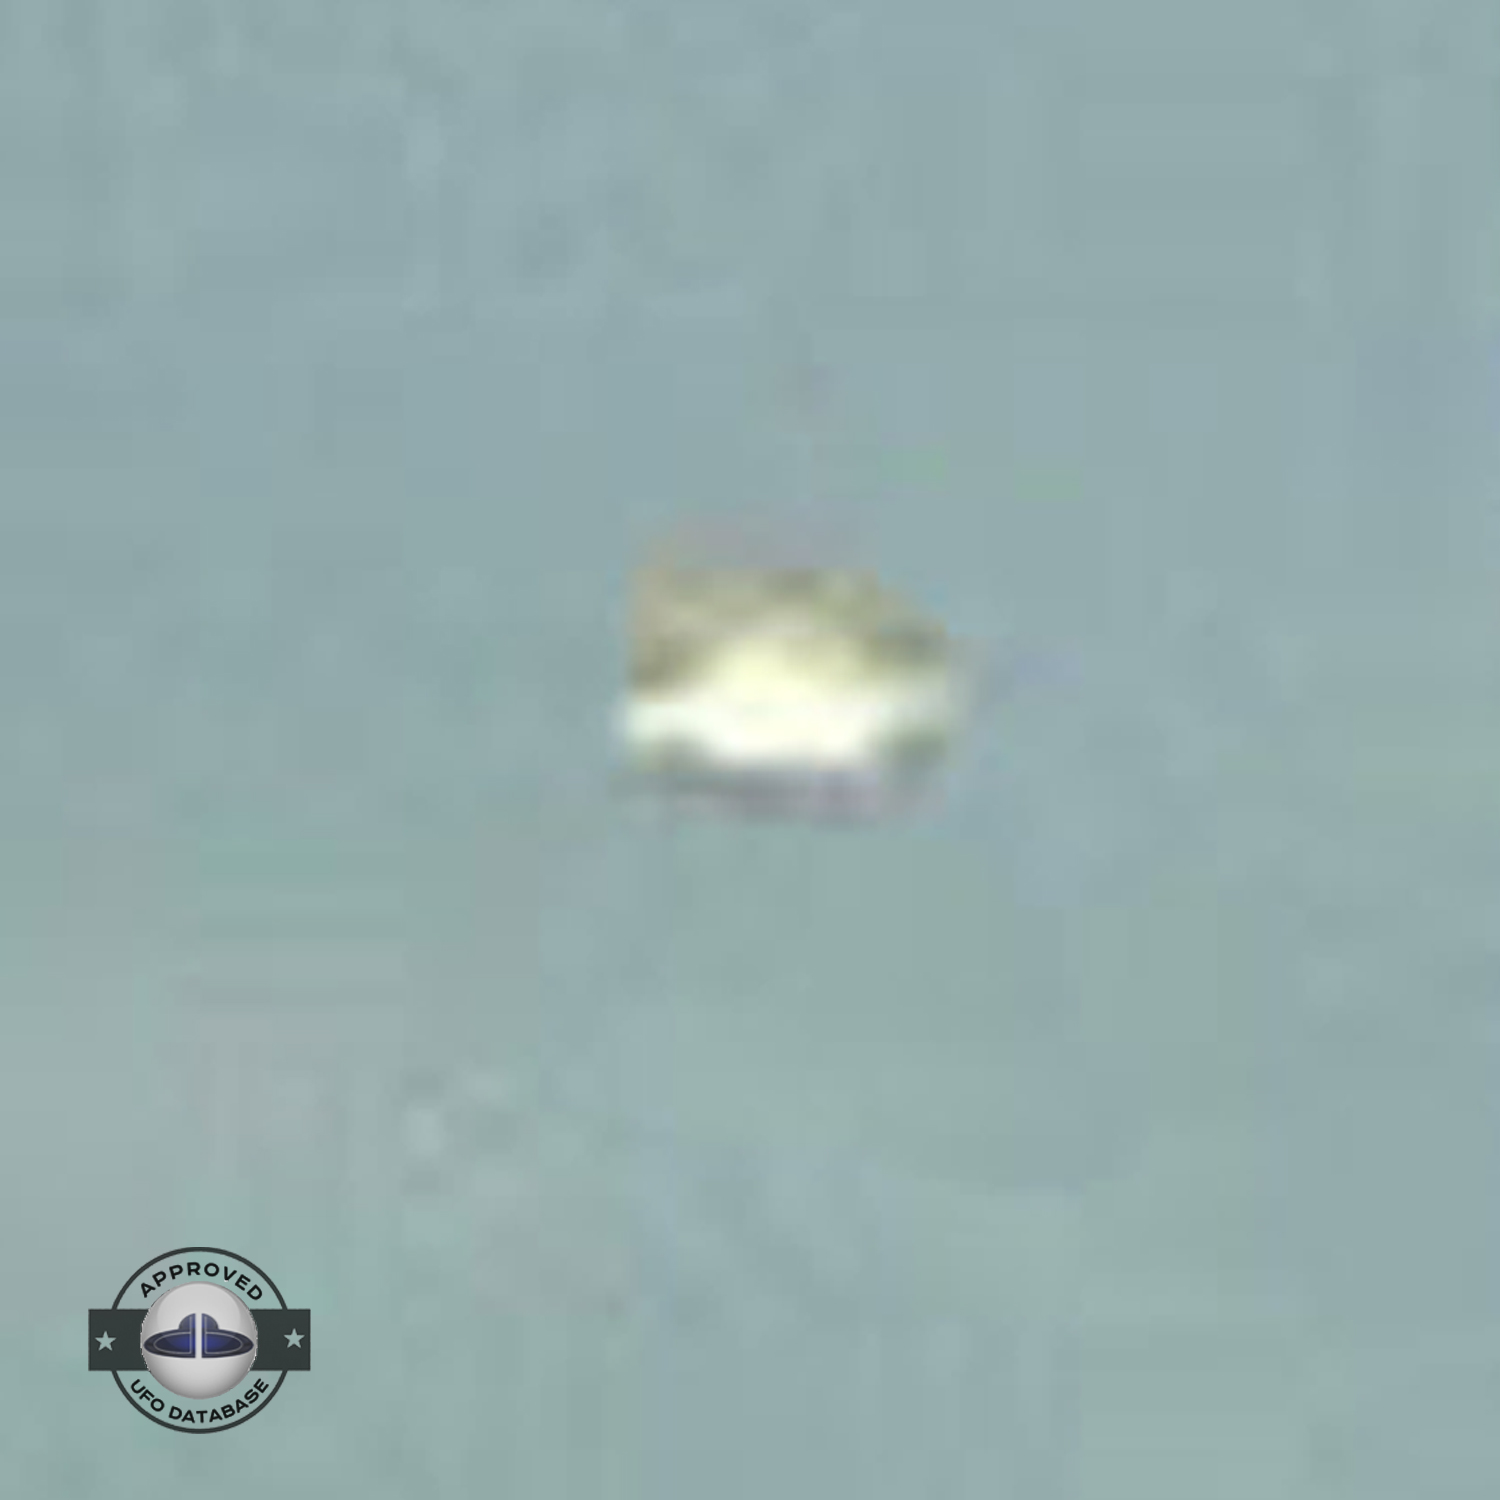 UFO picture - UFO passing in a sunset sky over houses | Watford, UK UFO Picture #142-7